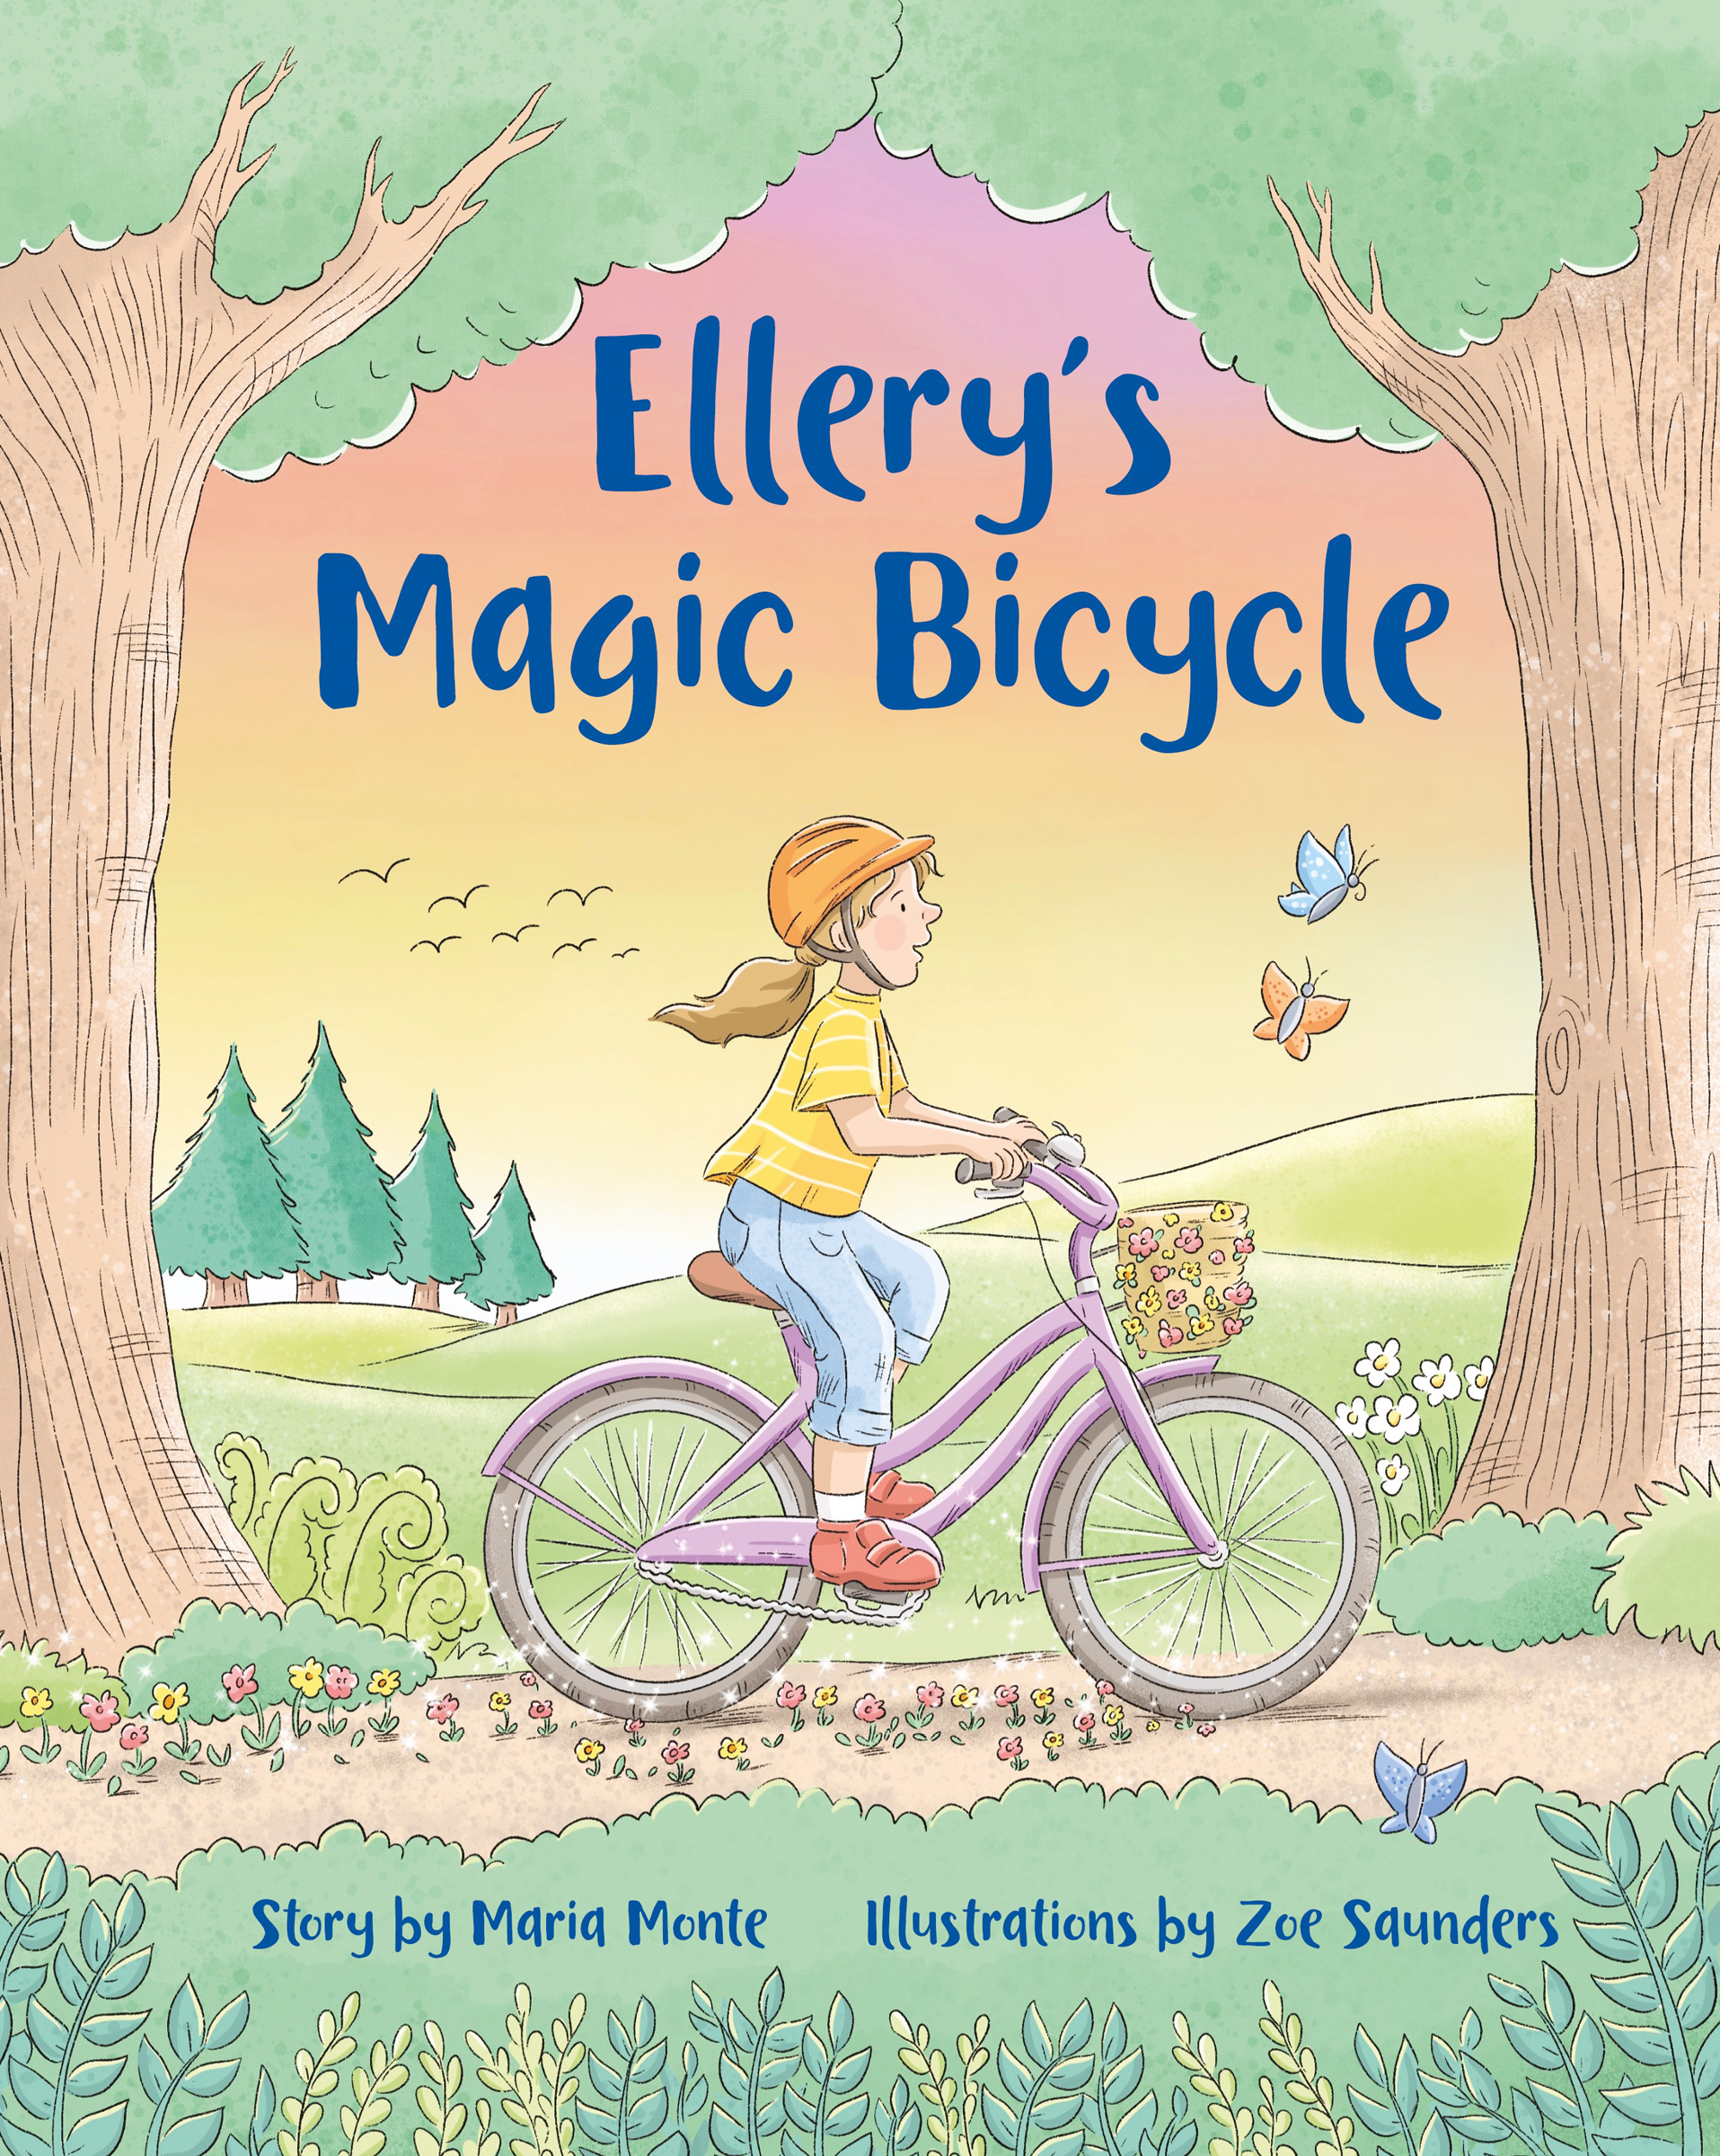 FREE: Ellery’s Magic Bicycle by Maria Monte